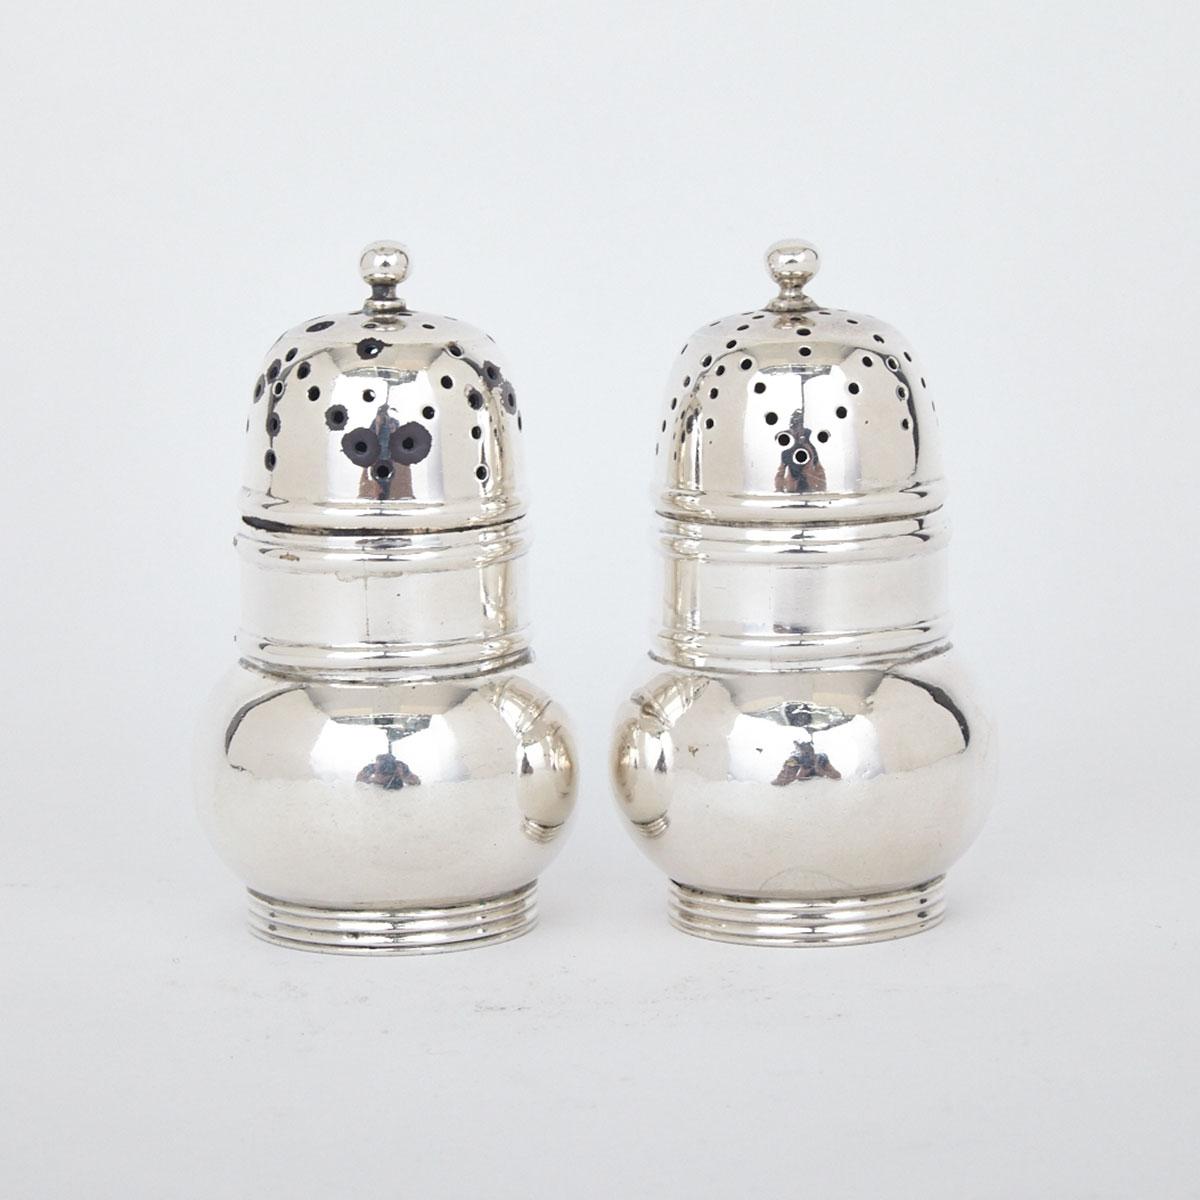 Pair of Victorian Silver Salt and Pepper Shakers, Pairpoint Bros., London, 1881